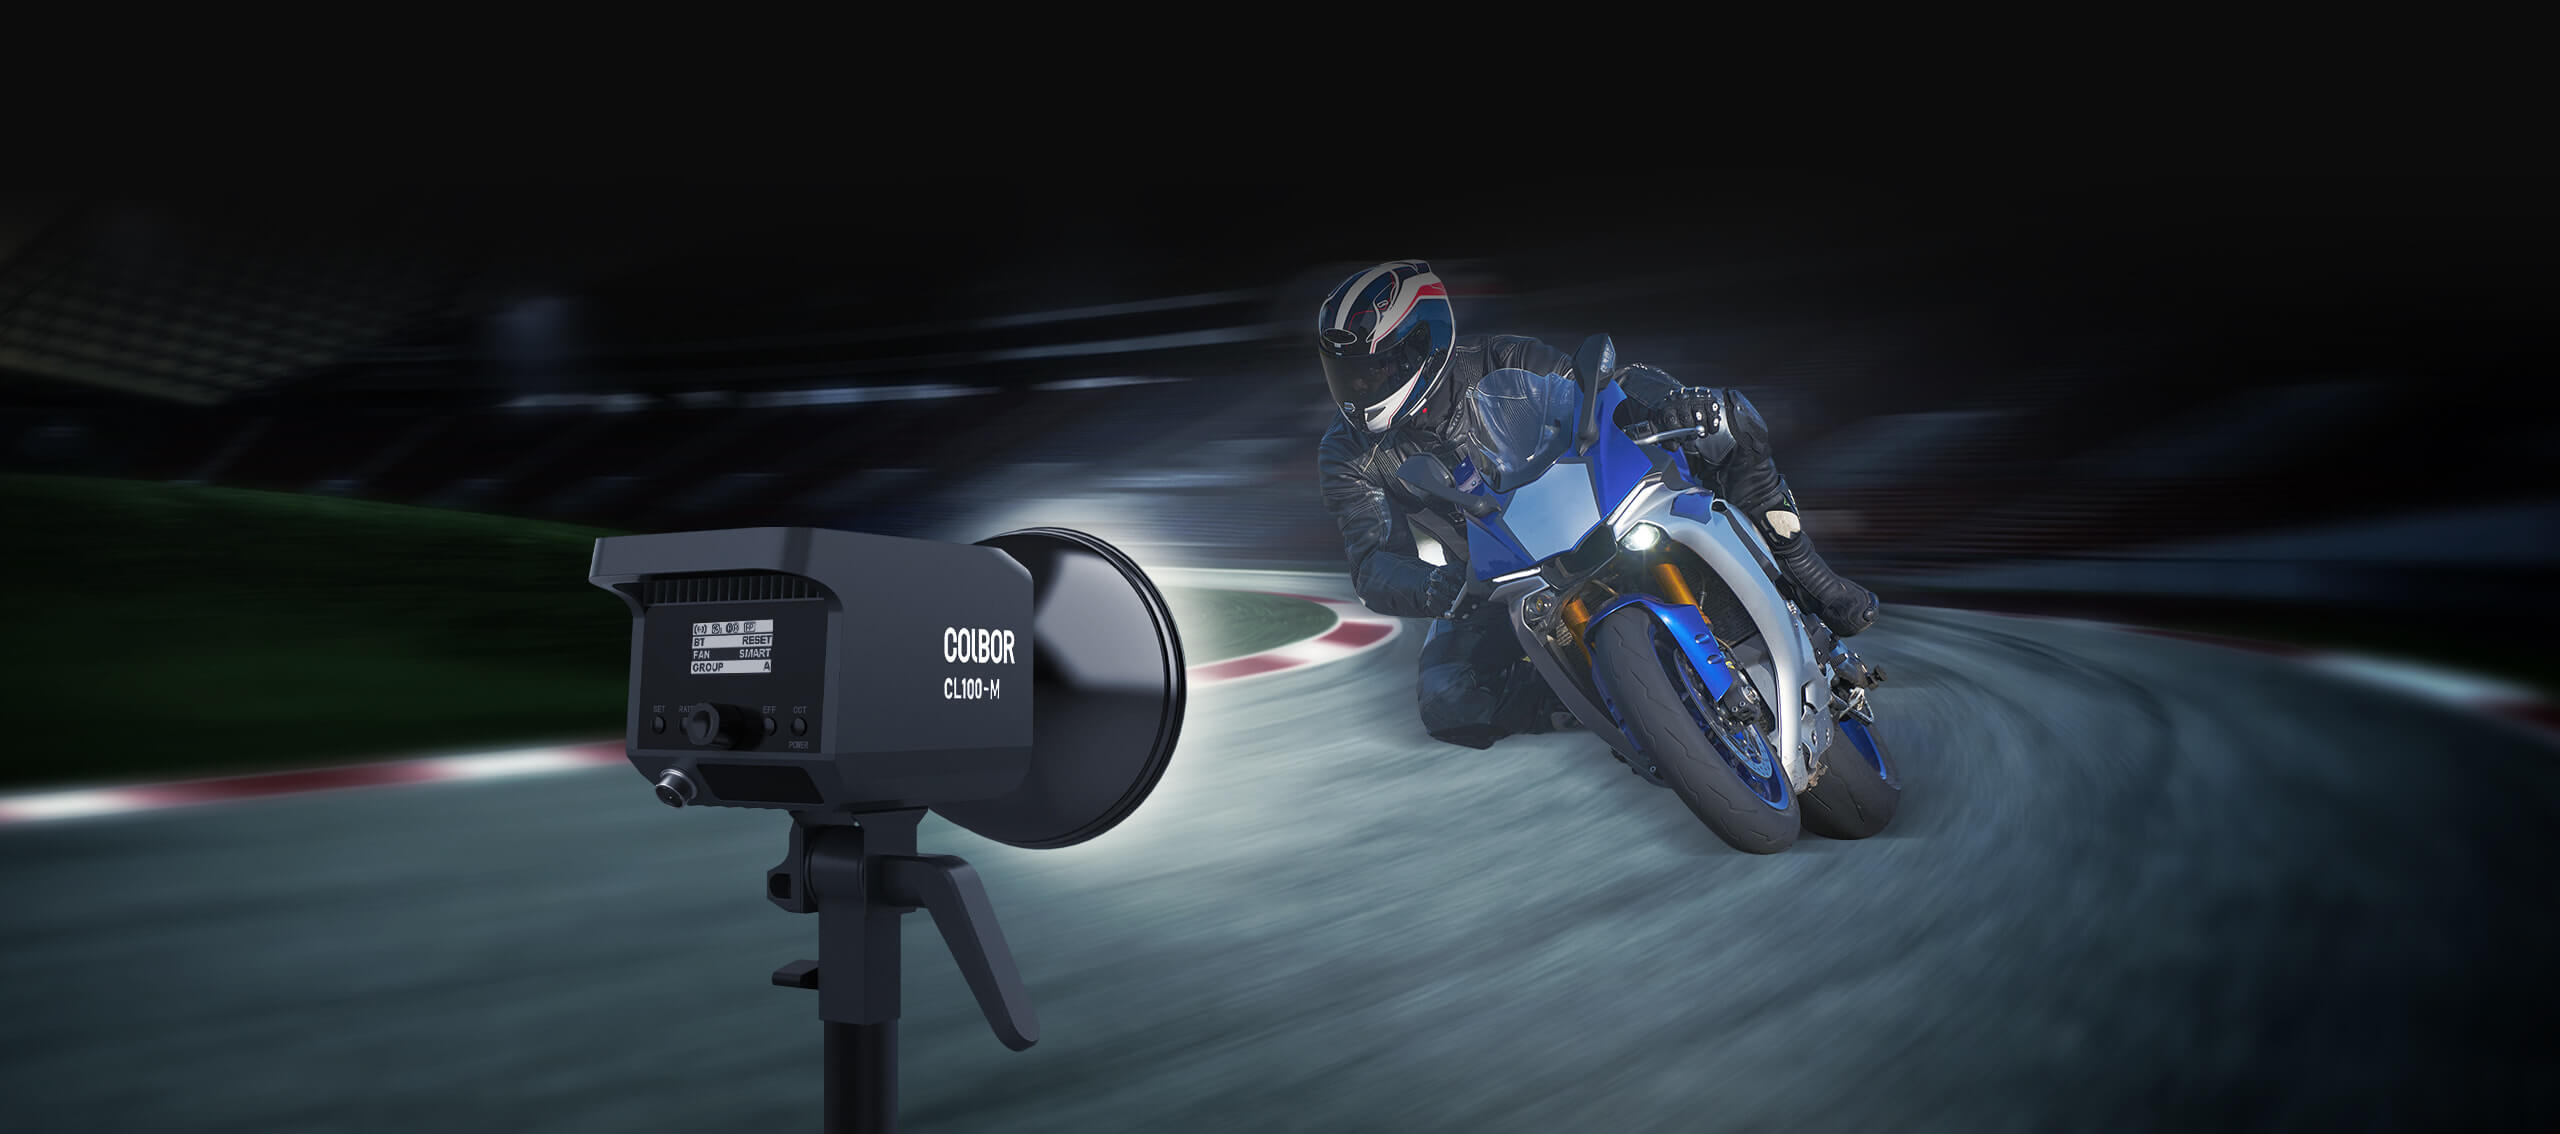 COLBOR CL100-M is ideal for high-speed filming.